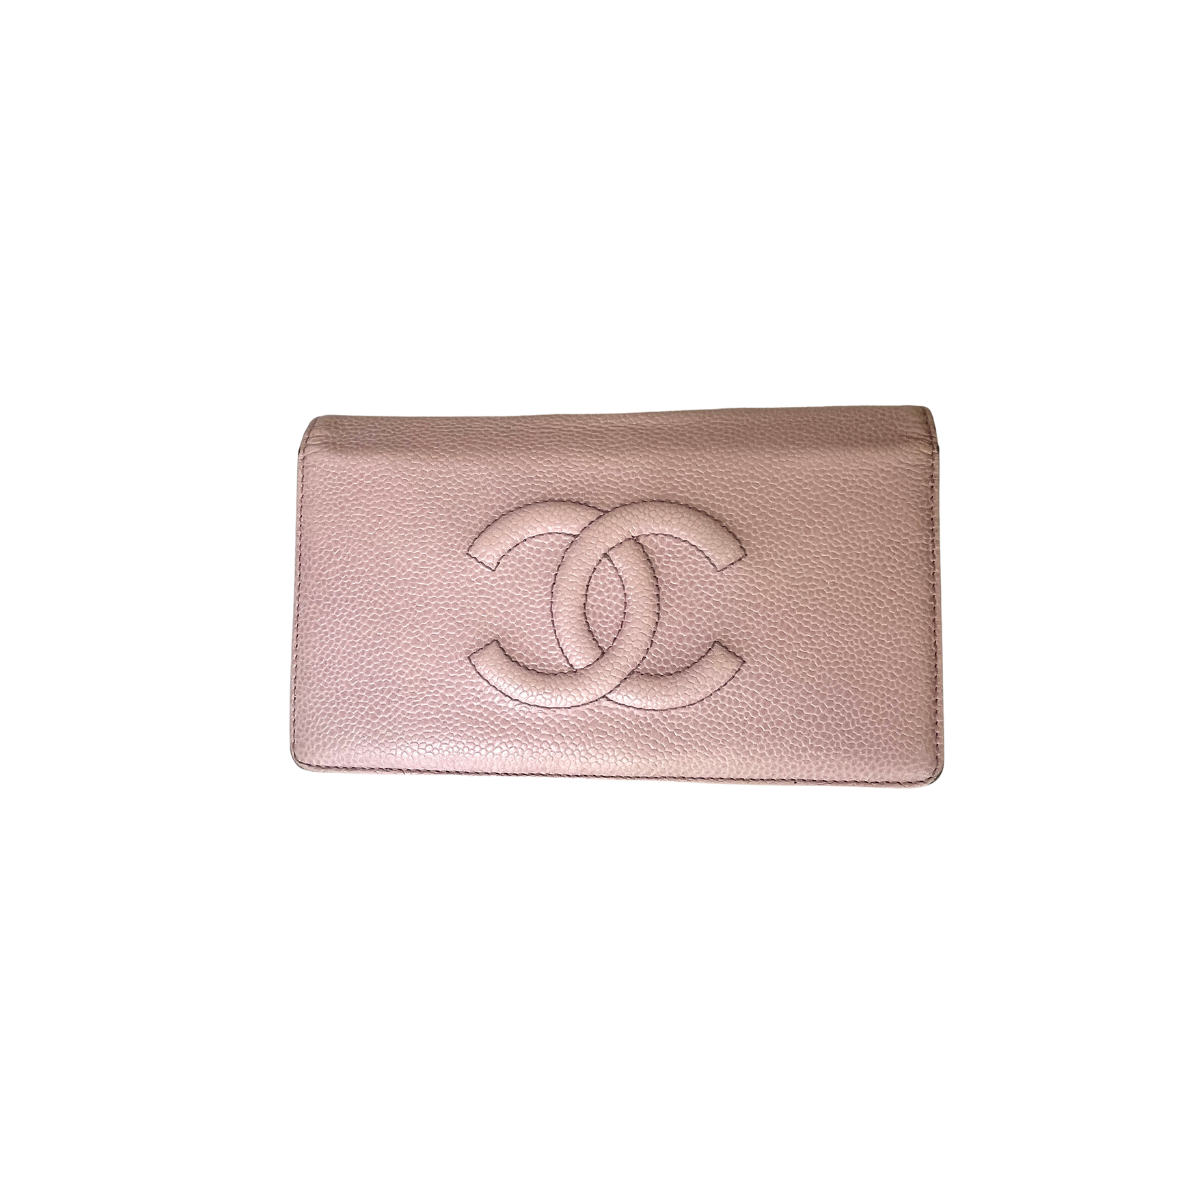 Chanel Chanel CC Wallet Large Caviar Leather - Wallets - Etoile Luxury Vintage